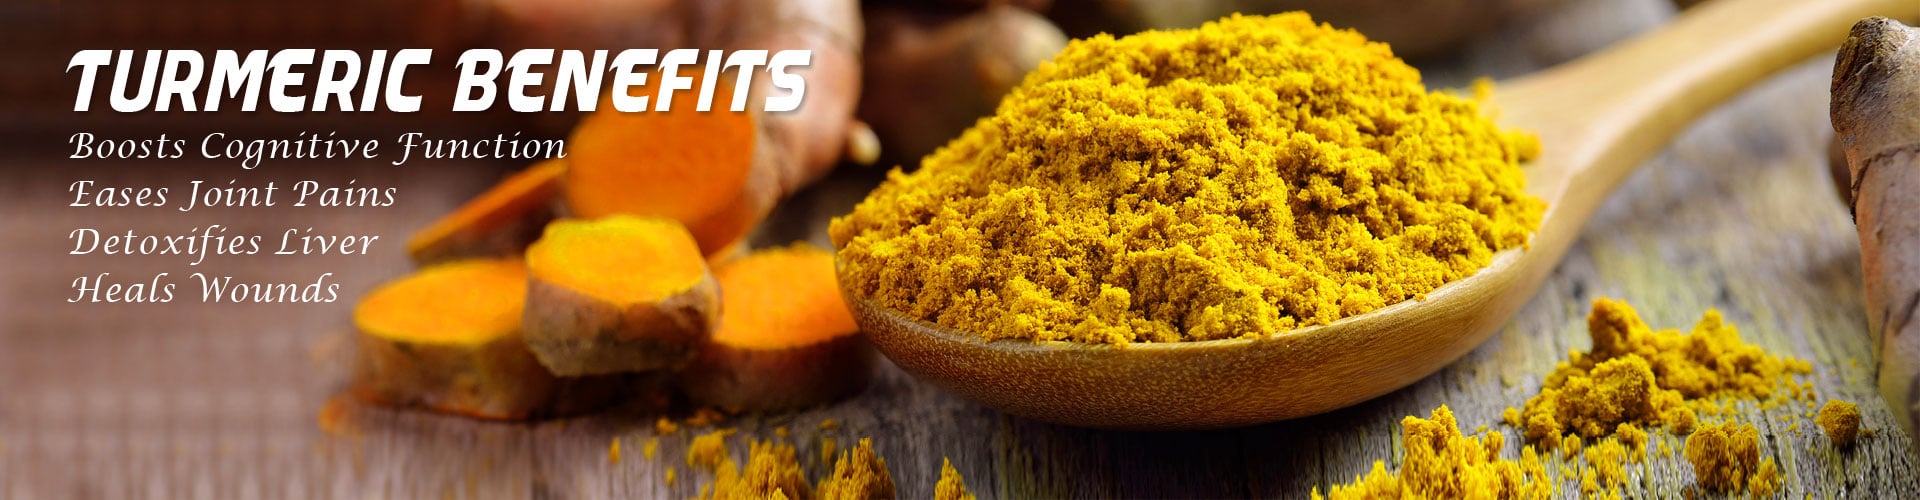 Turmeric Benefits - Boosts Cognitive Function, Eases Joint Pains, Detoxifies Liver, Heals Wounds